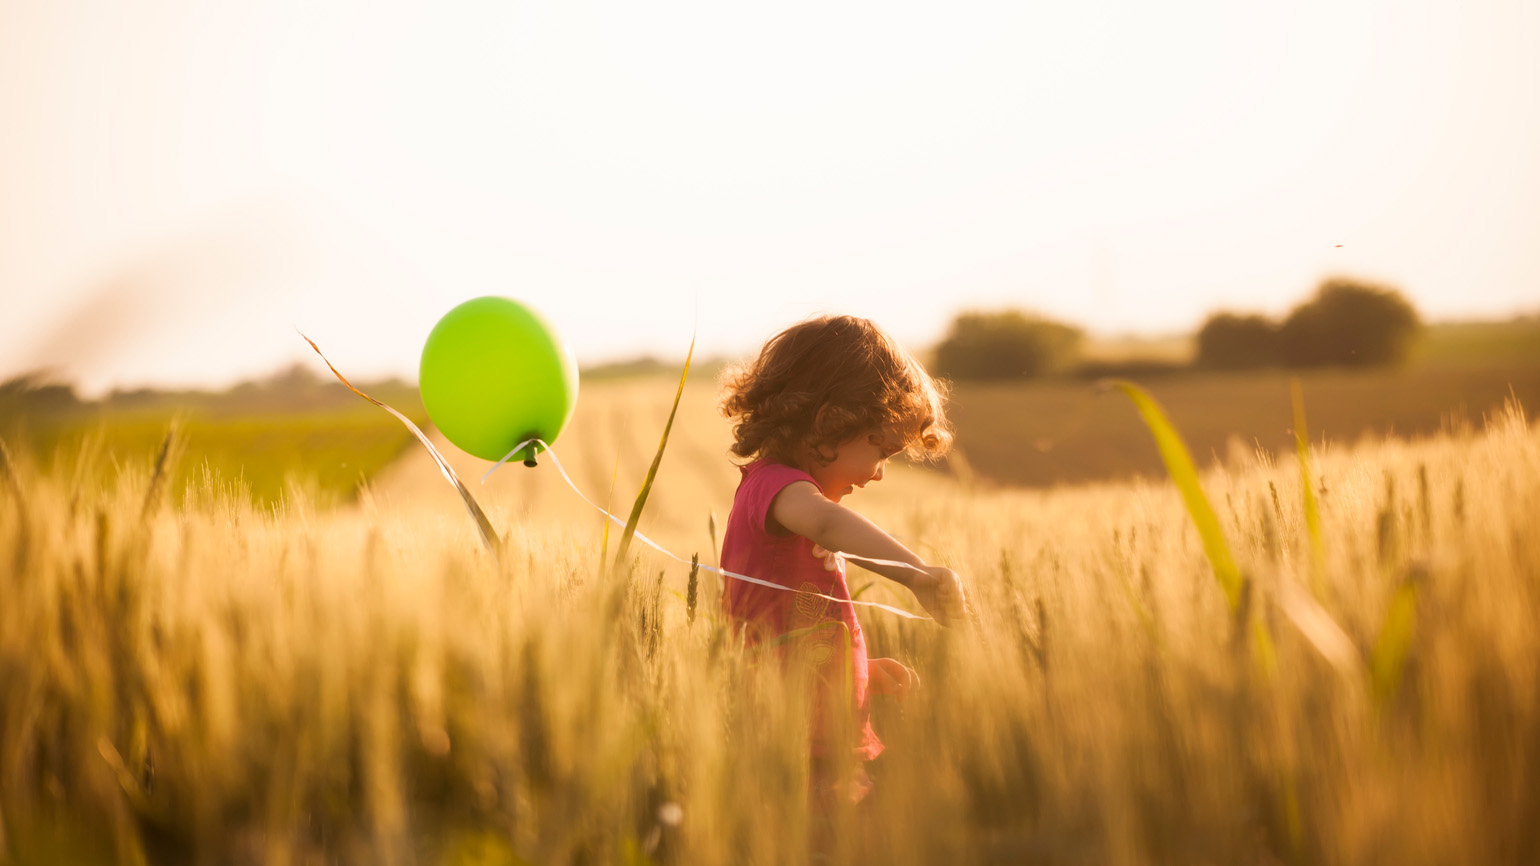 Young child frolicking in a field with a green balloon; Getty Images